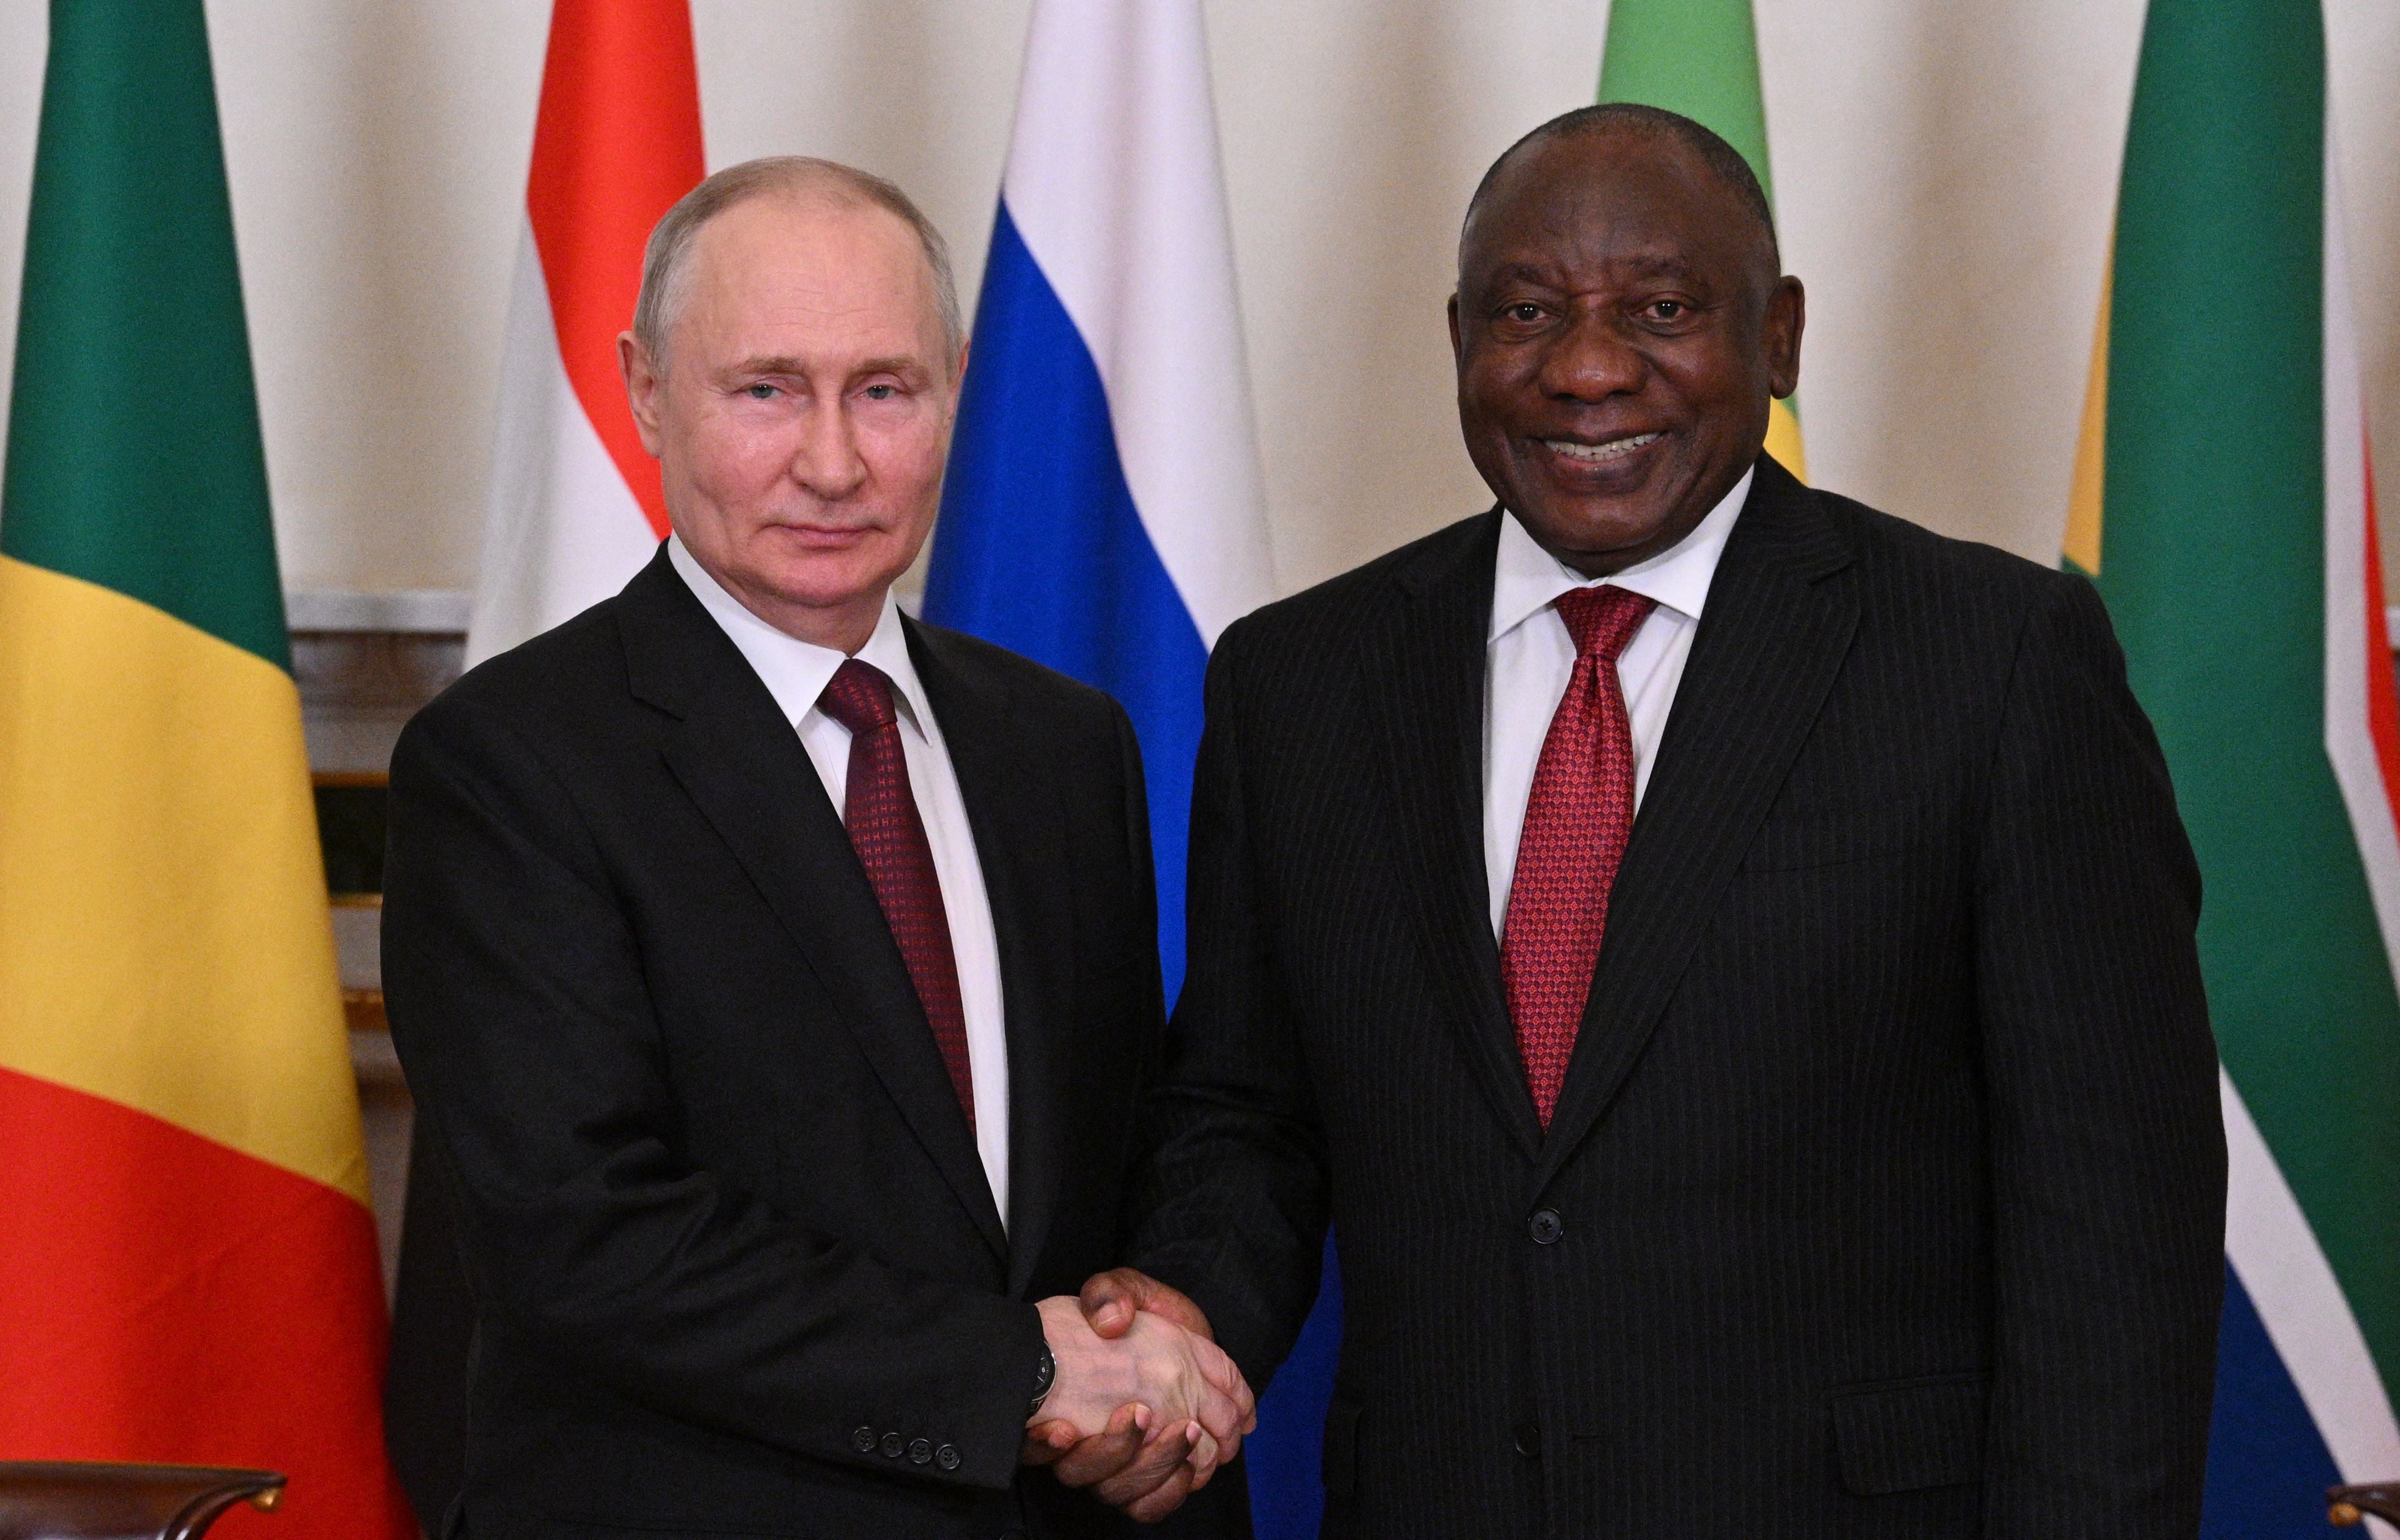 Putin, threatened with arrest, will not attend the summit of Brics countries in South Africa